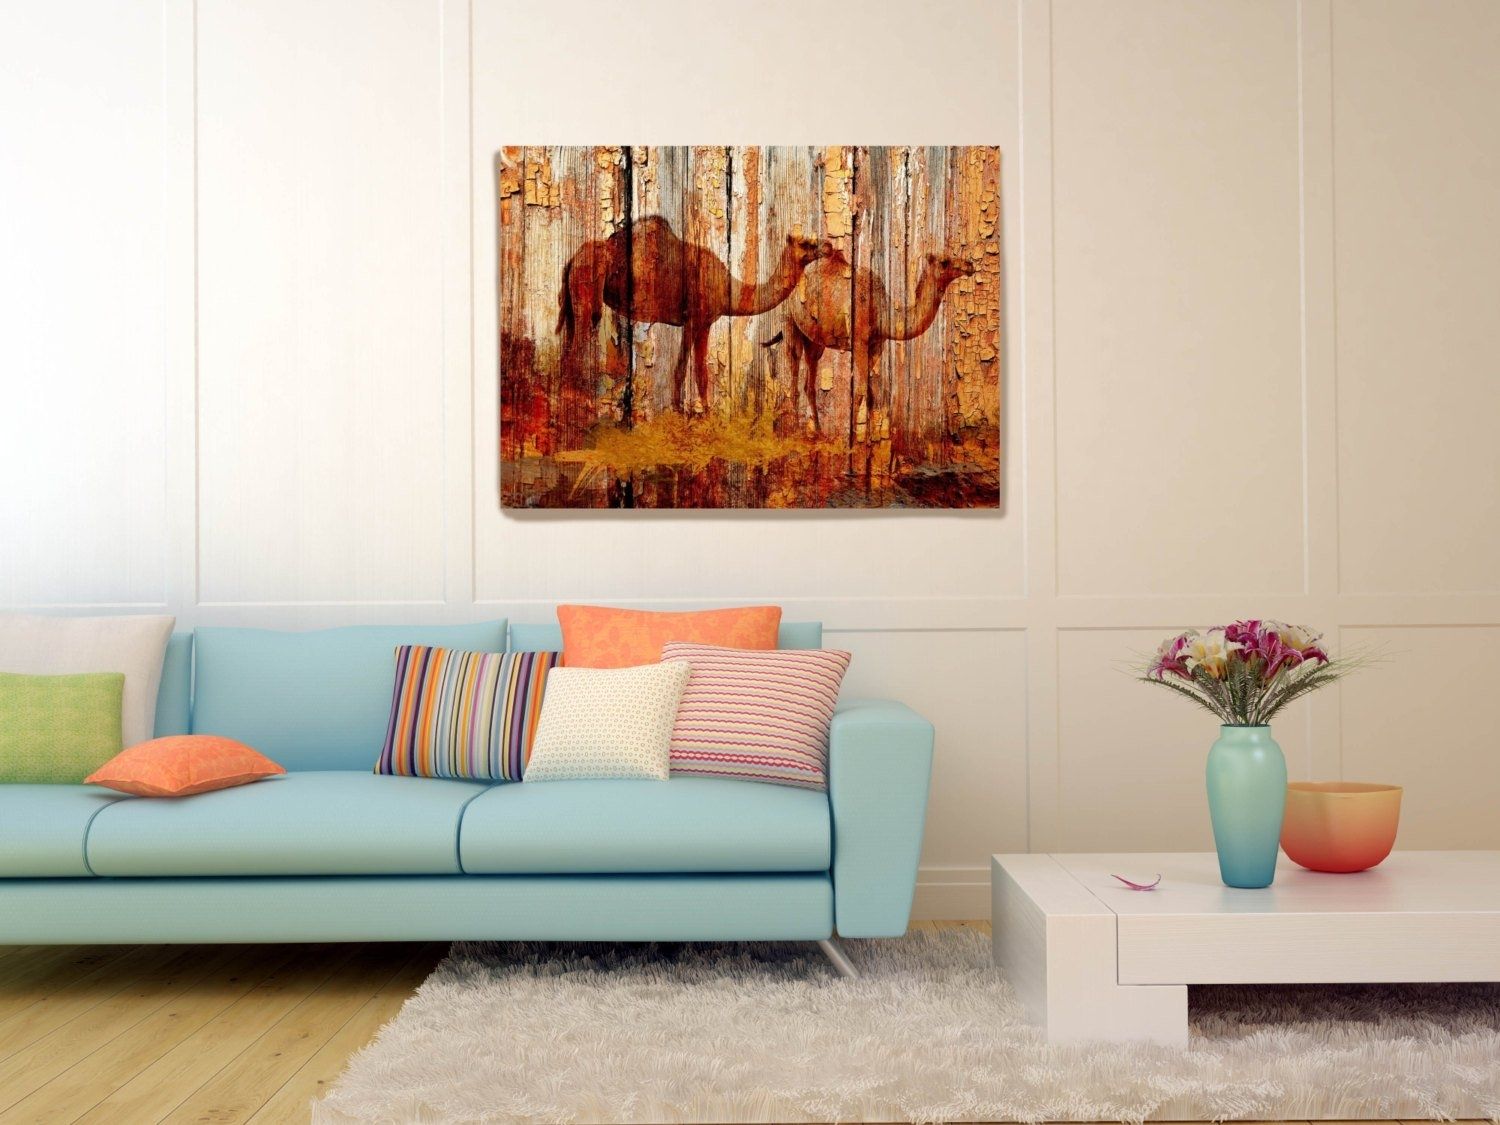 Camels On Wood Plank Canvas Wall Art Print Large Camel Canvas Print Within Plank Wall Art (View 19 of 20)